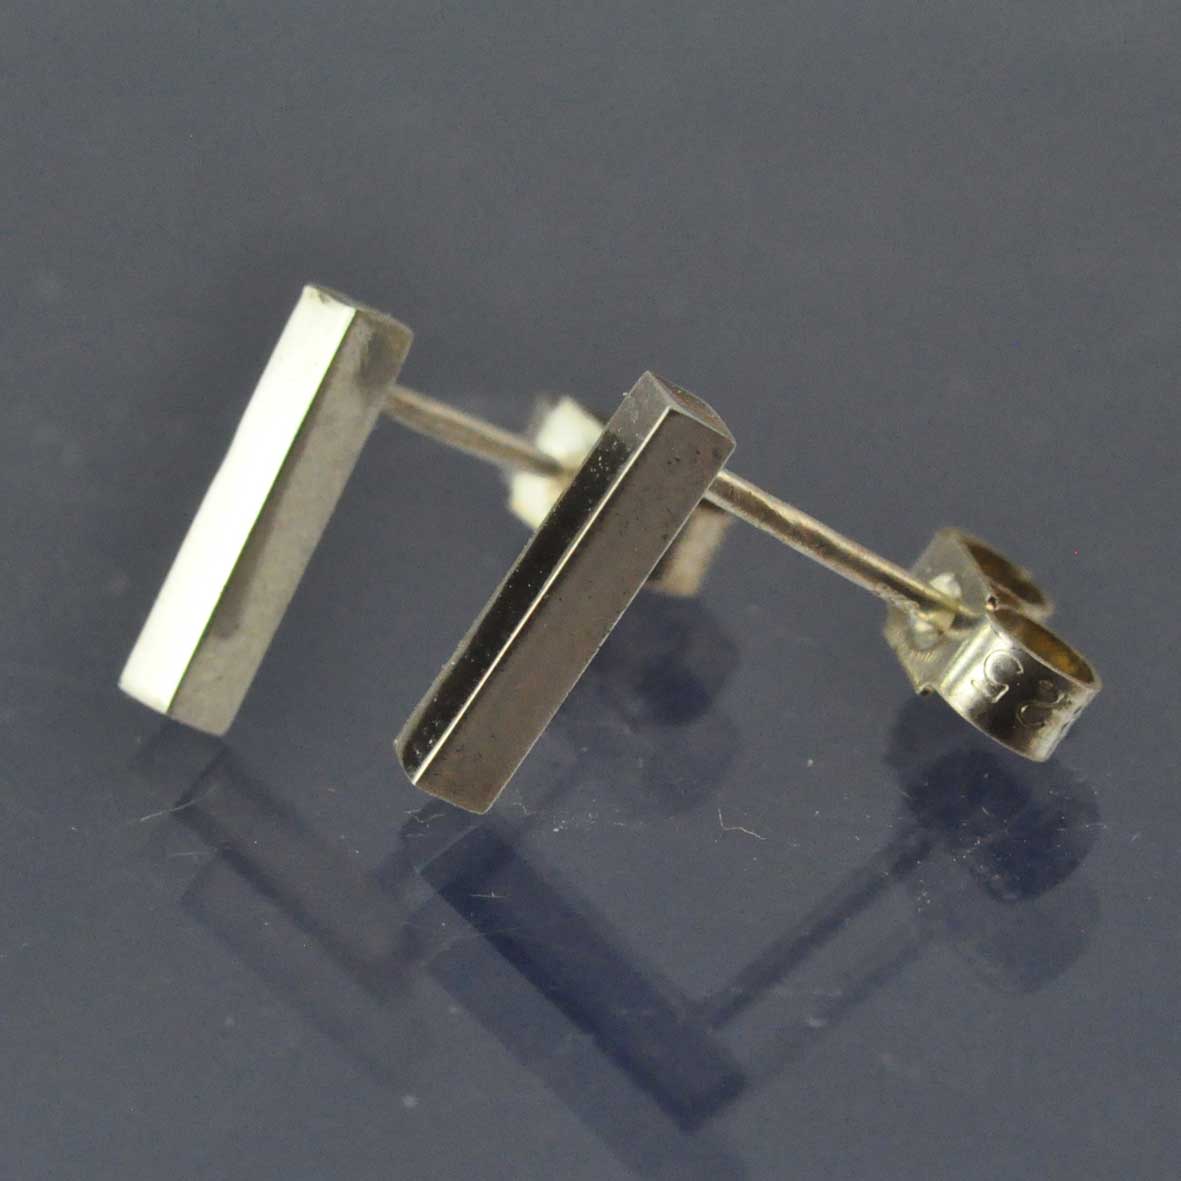 Bar Studs Earring by Chris Parry Jewellery